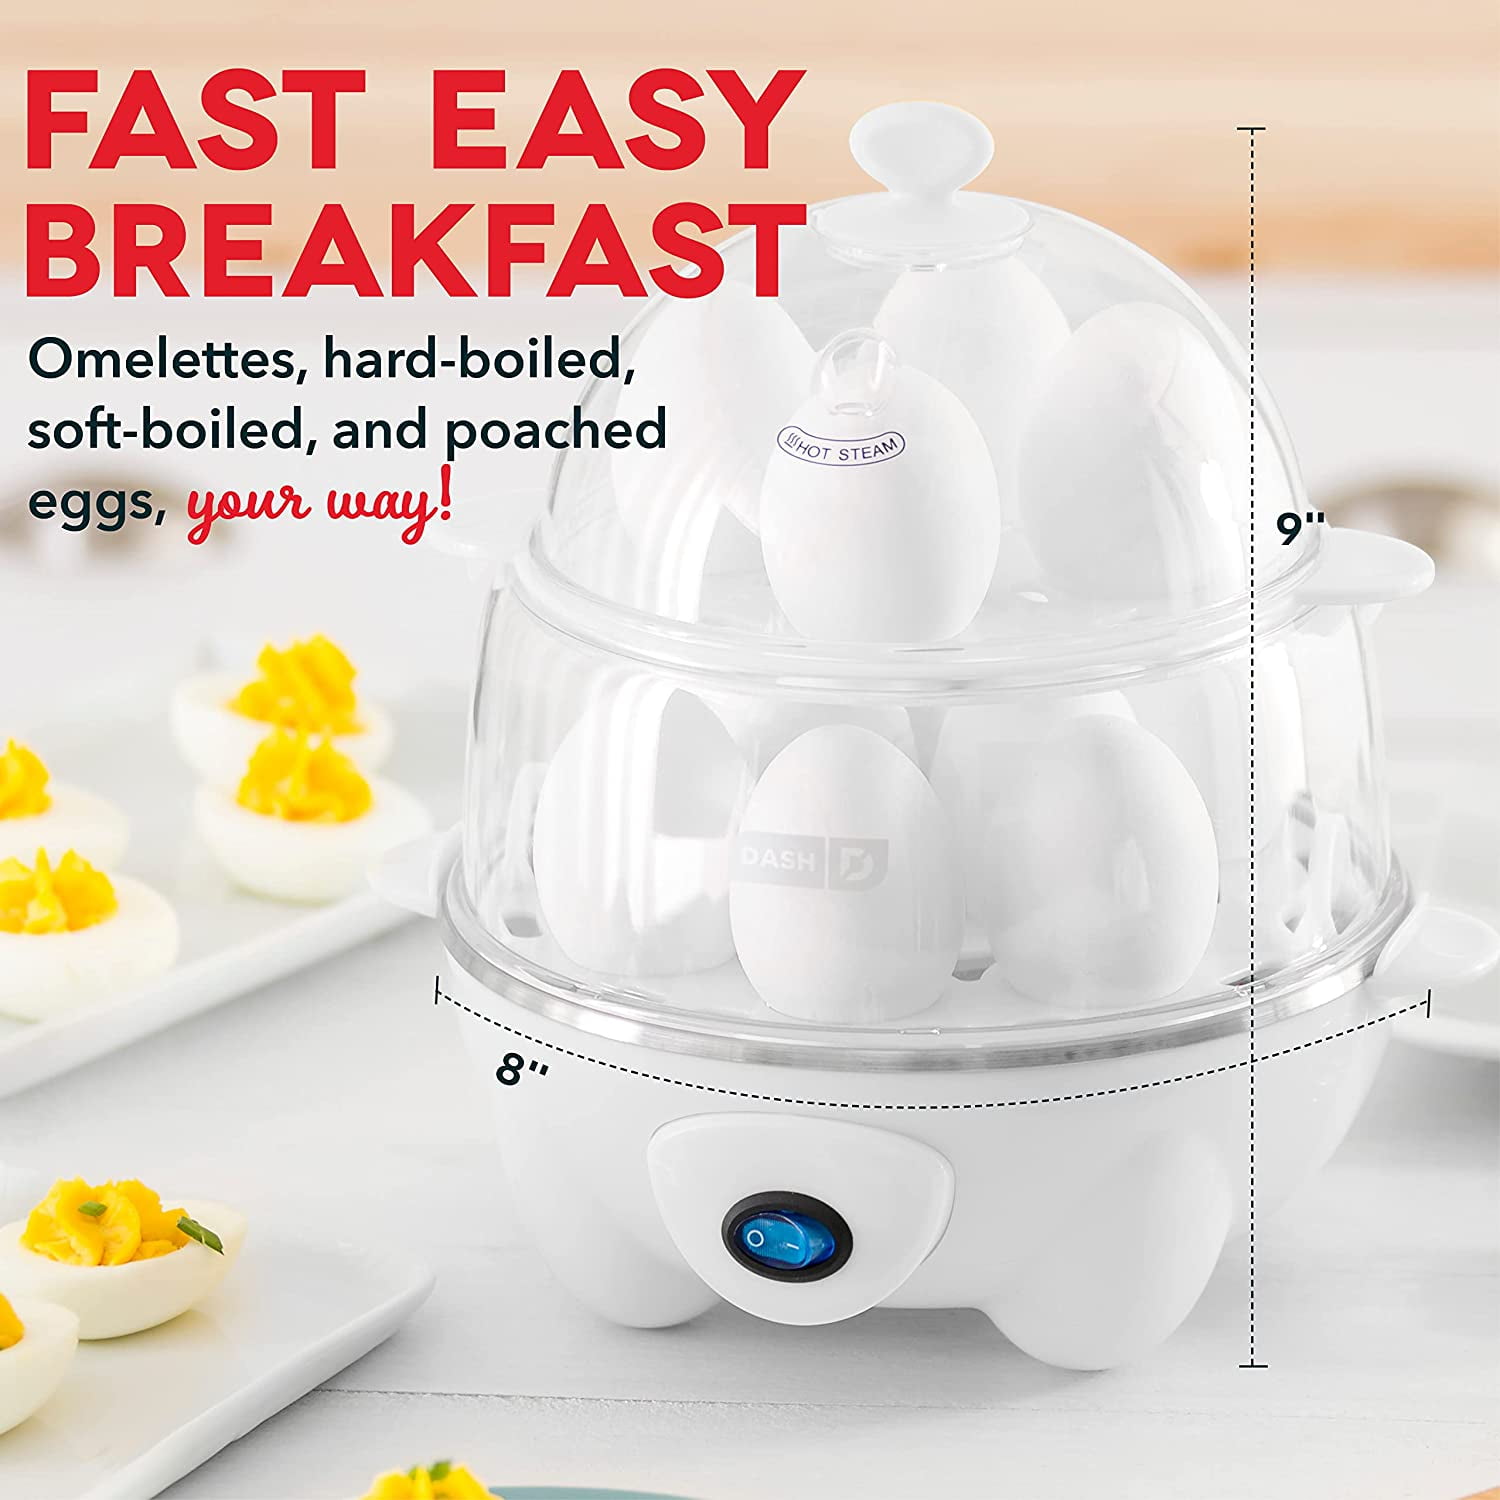 33% Off Dash Deluxe Rapid Egg Cooker 12 Egg Capacity or 40% Off a